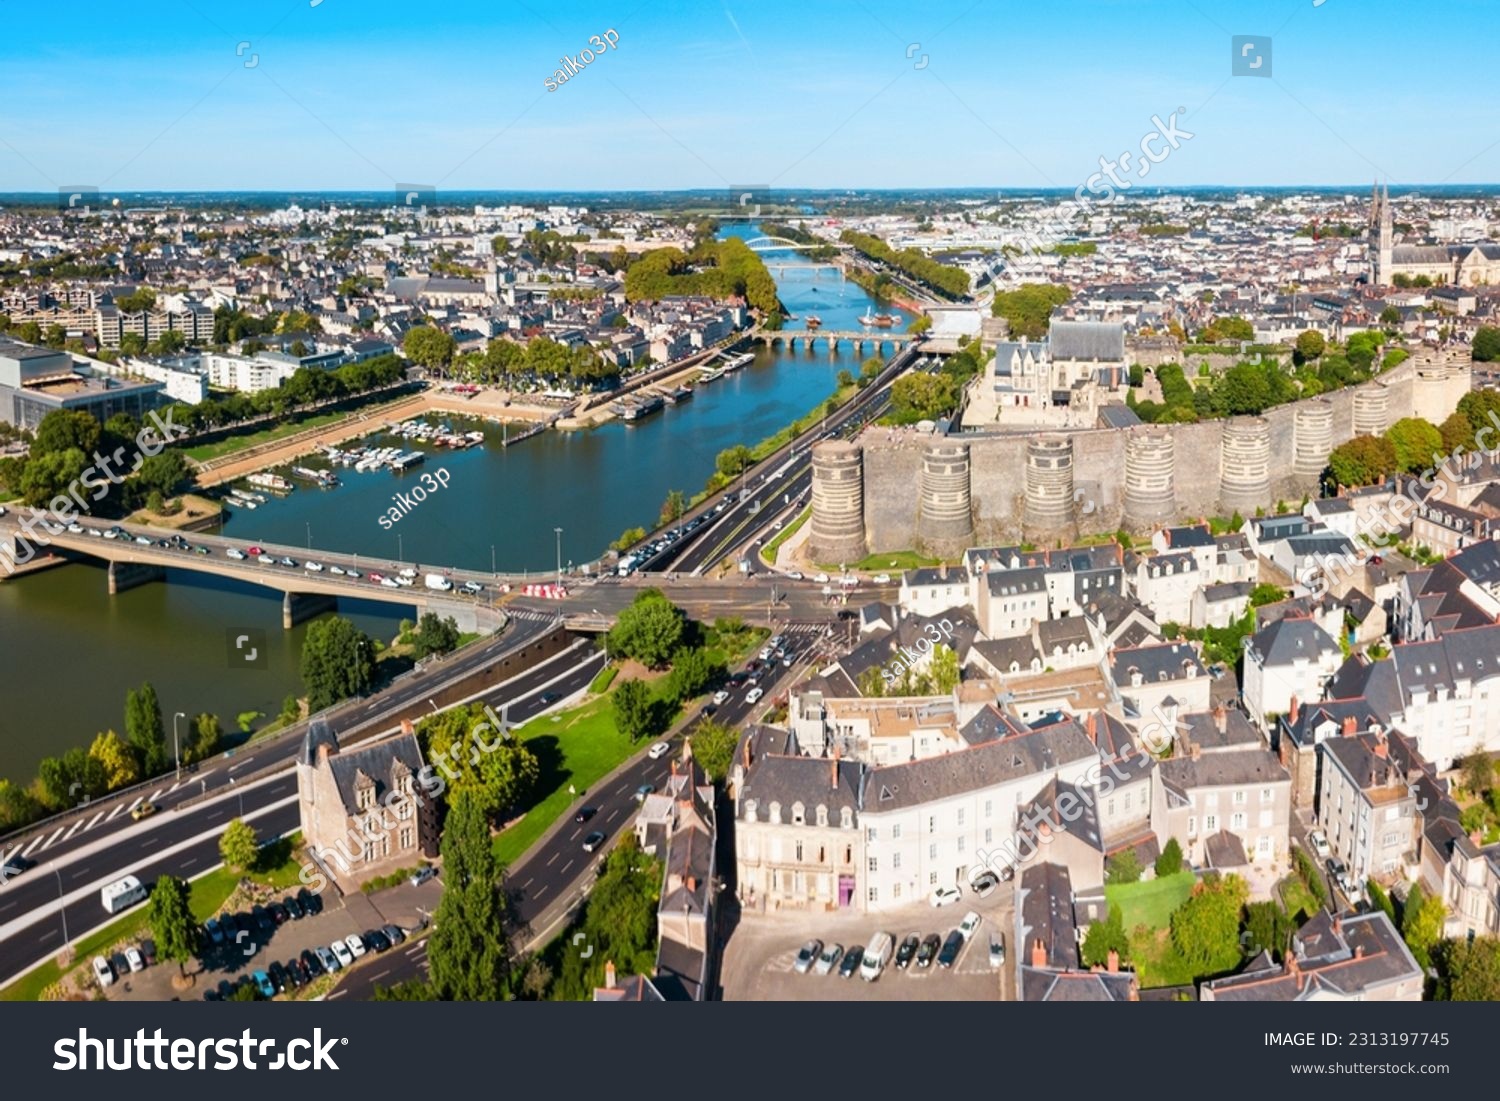 Angers aerial panoramic view. Angers is a city in Loire Valley, western France. #2313197745